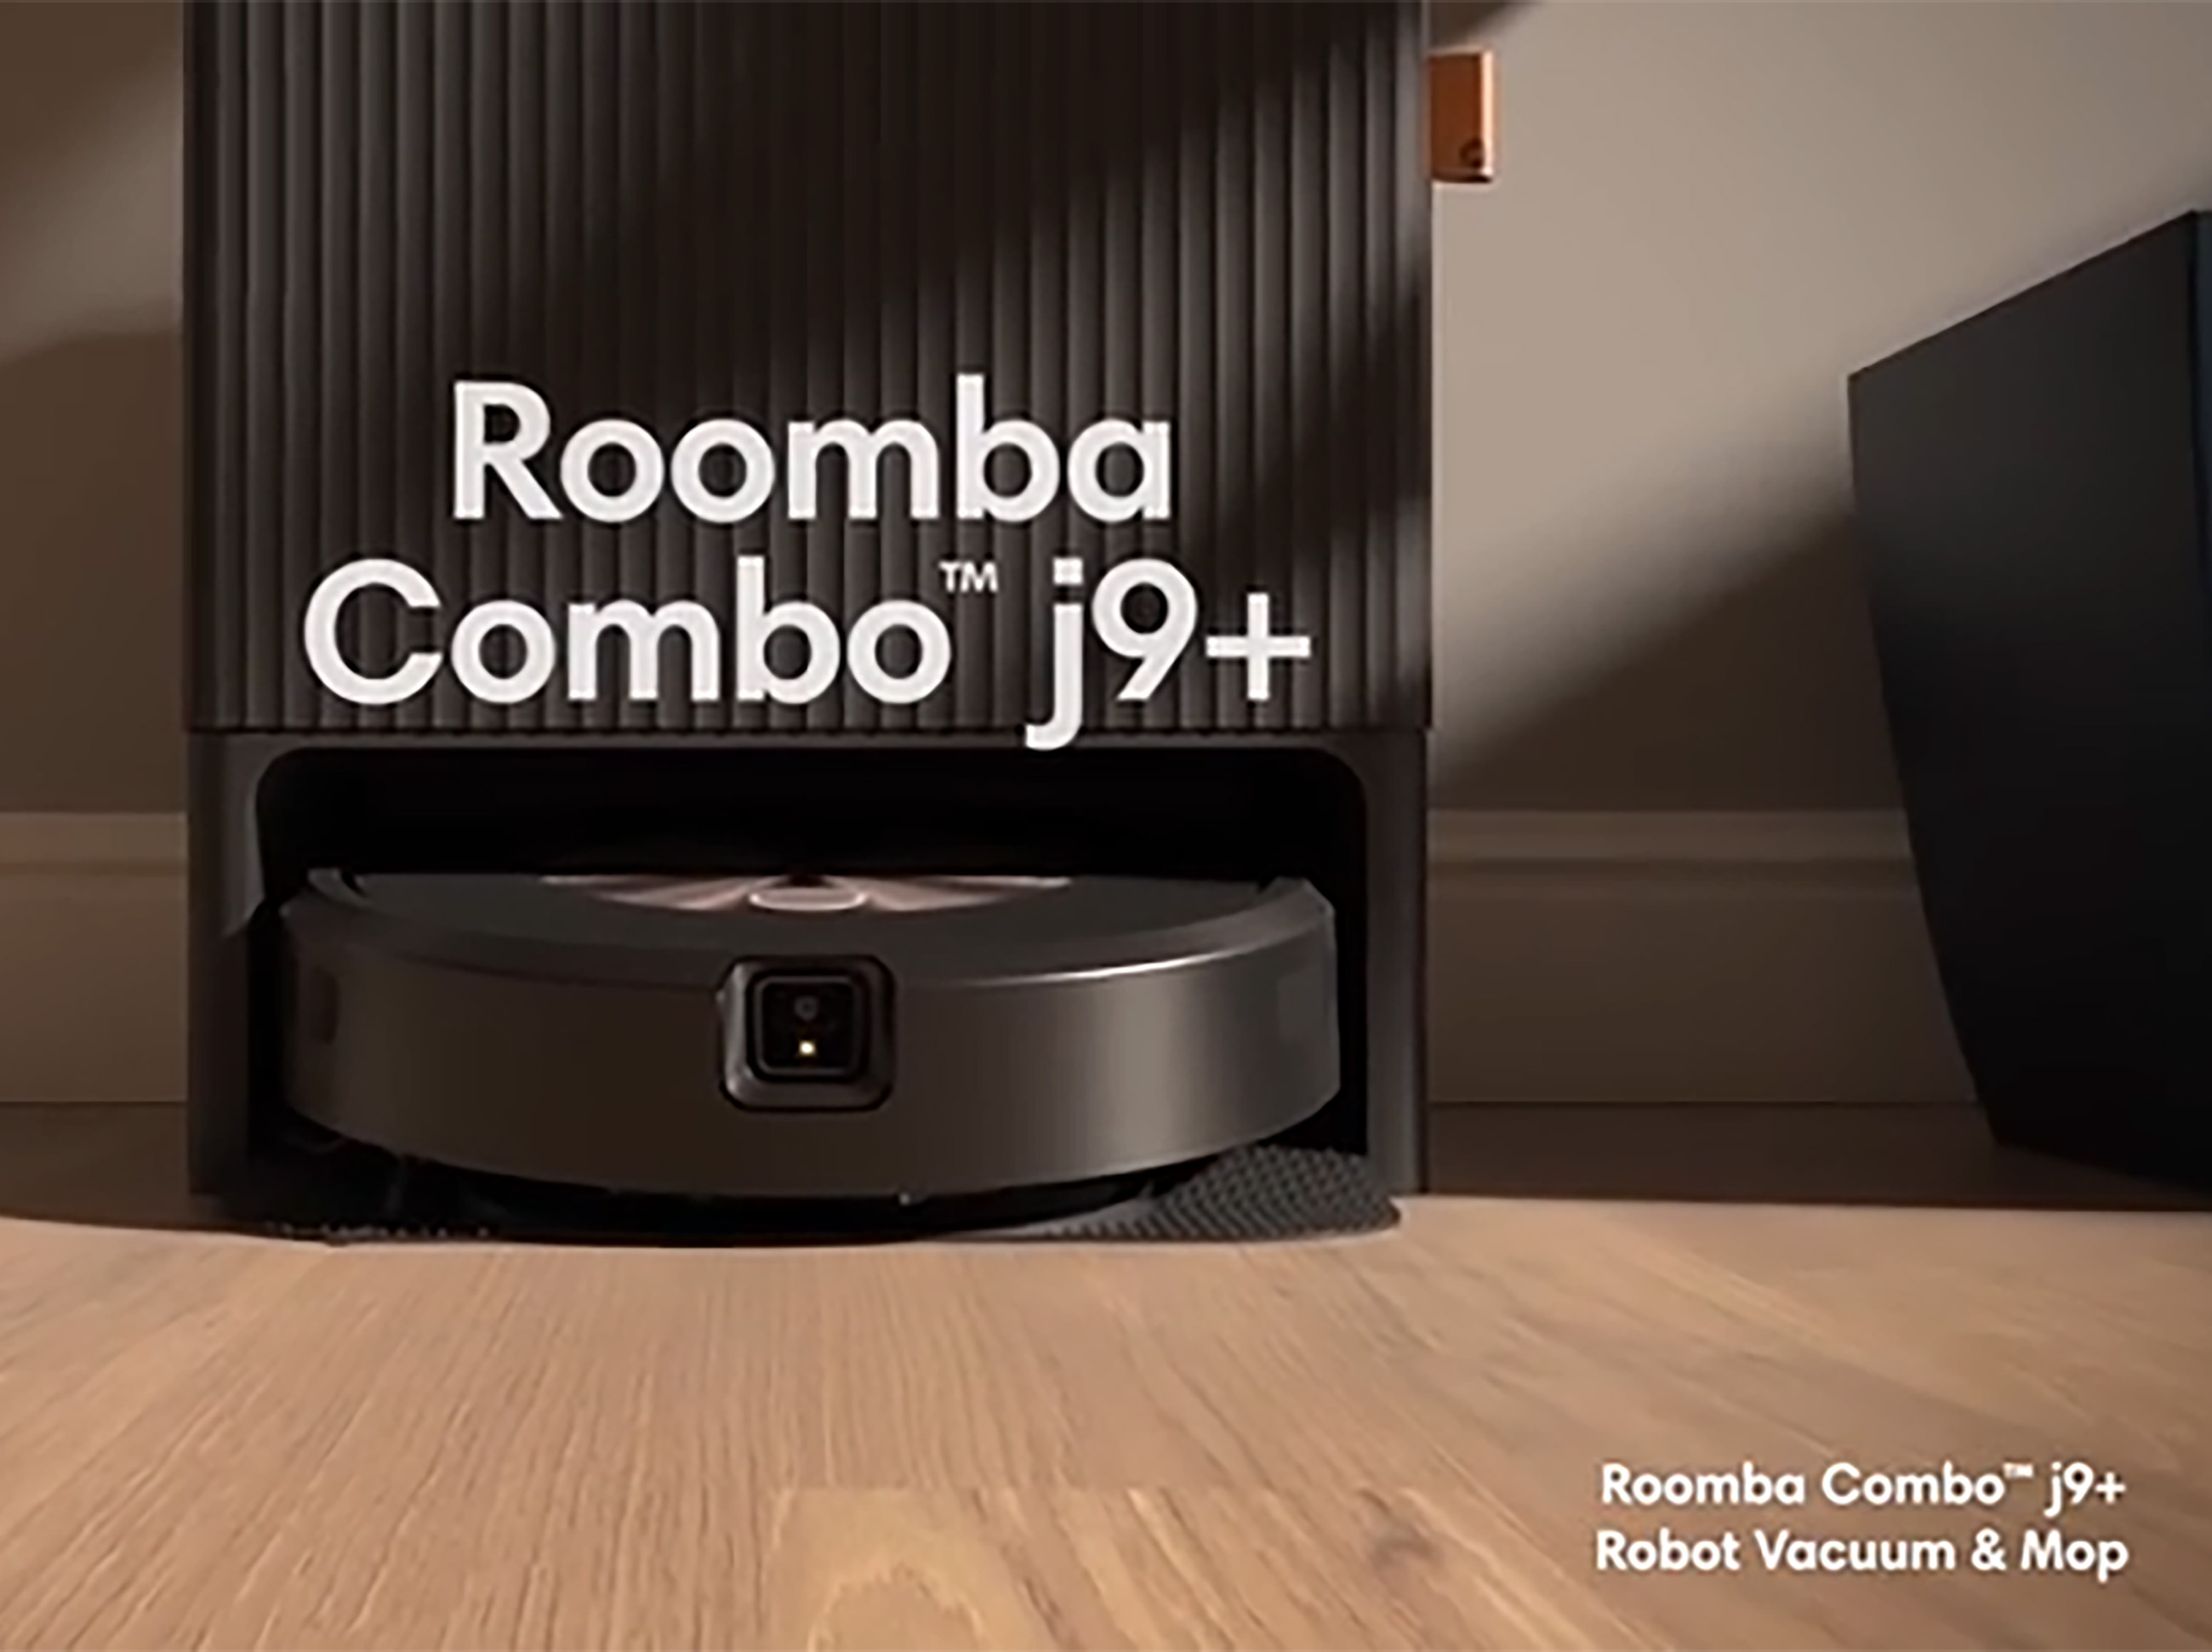 Staining Rugs, Getting Stuck and Can't Learn: iRobot Solves Rival Robot Pitfalls with New Roomba Models Featuring iRobot OS Intelligence